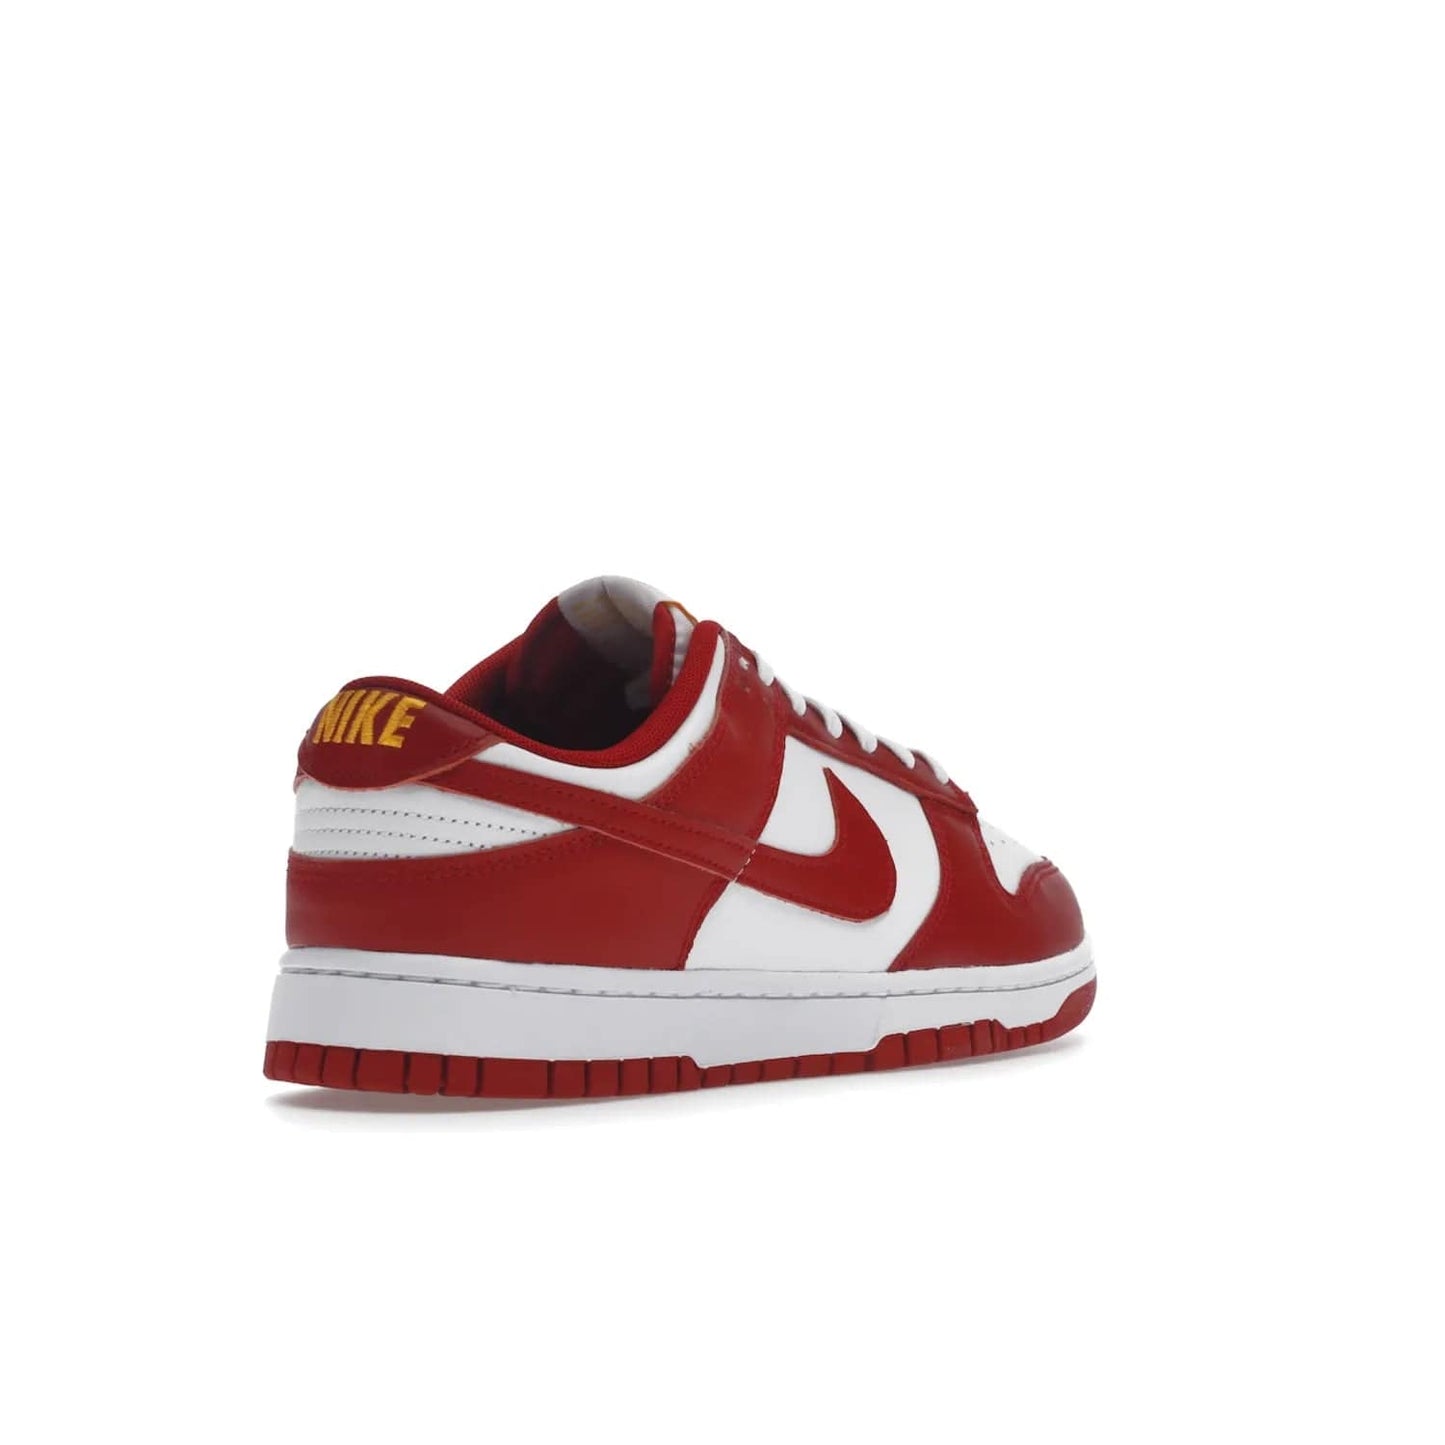 Nike Dunk Low USC - Image 32 - Only at www.BallersClubKickz.com - The Nike Dunk Low USC DD1391-602 colorway captures the eye of University of Southern California fans. Crafted with leather and rubber upper and outsole, this stylish sneaker features a white, gym red, and yellow colorway. With yellow Nike branding, white perforated vamp, and red suede Swoosh, this sneaker turns heads. Get the classic Nike Dunk Low USC releasing on November 9th, 2022.